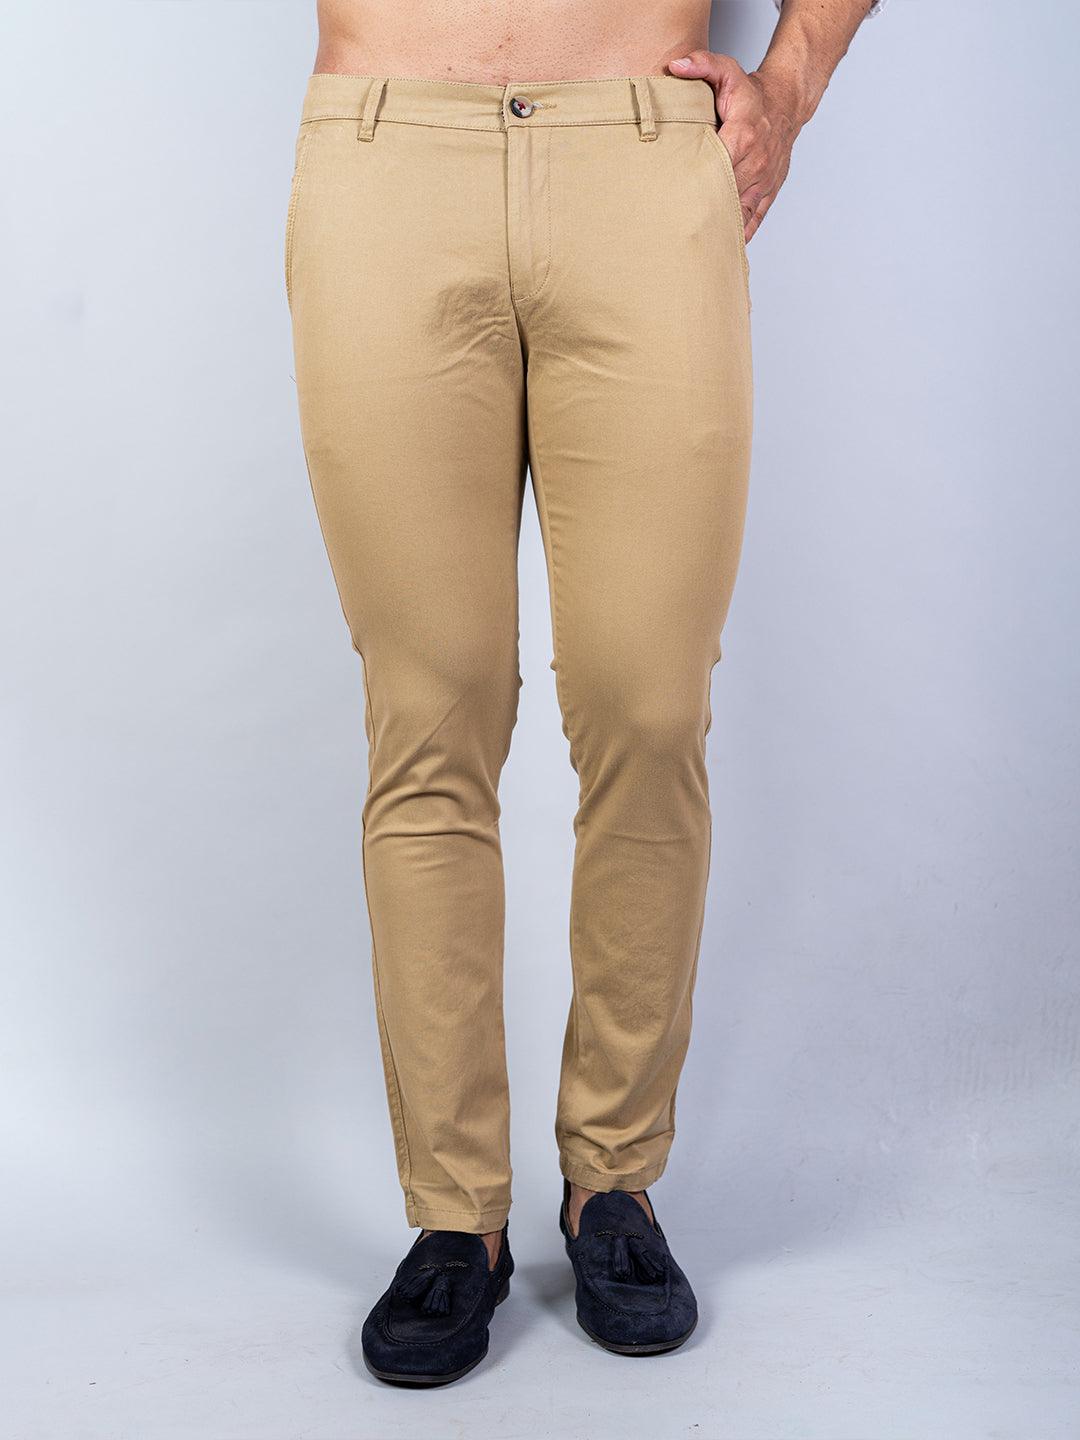 Khaki Derby Jeans Community Twill Cotton Lycra Solid Slim Tapered Mens  Trouser